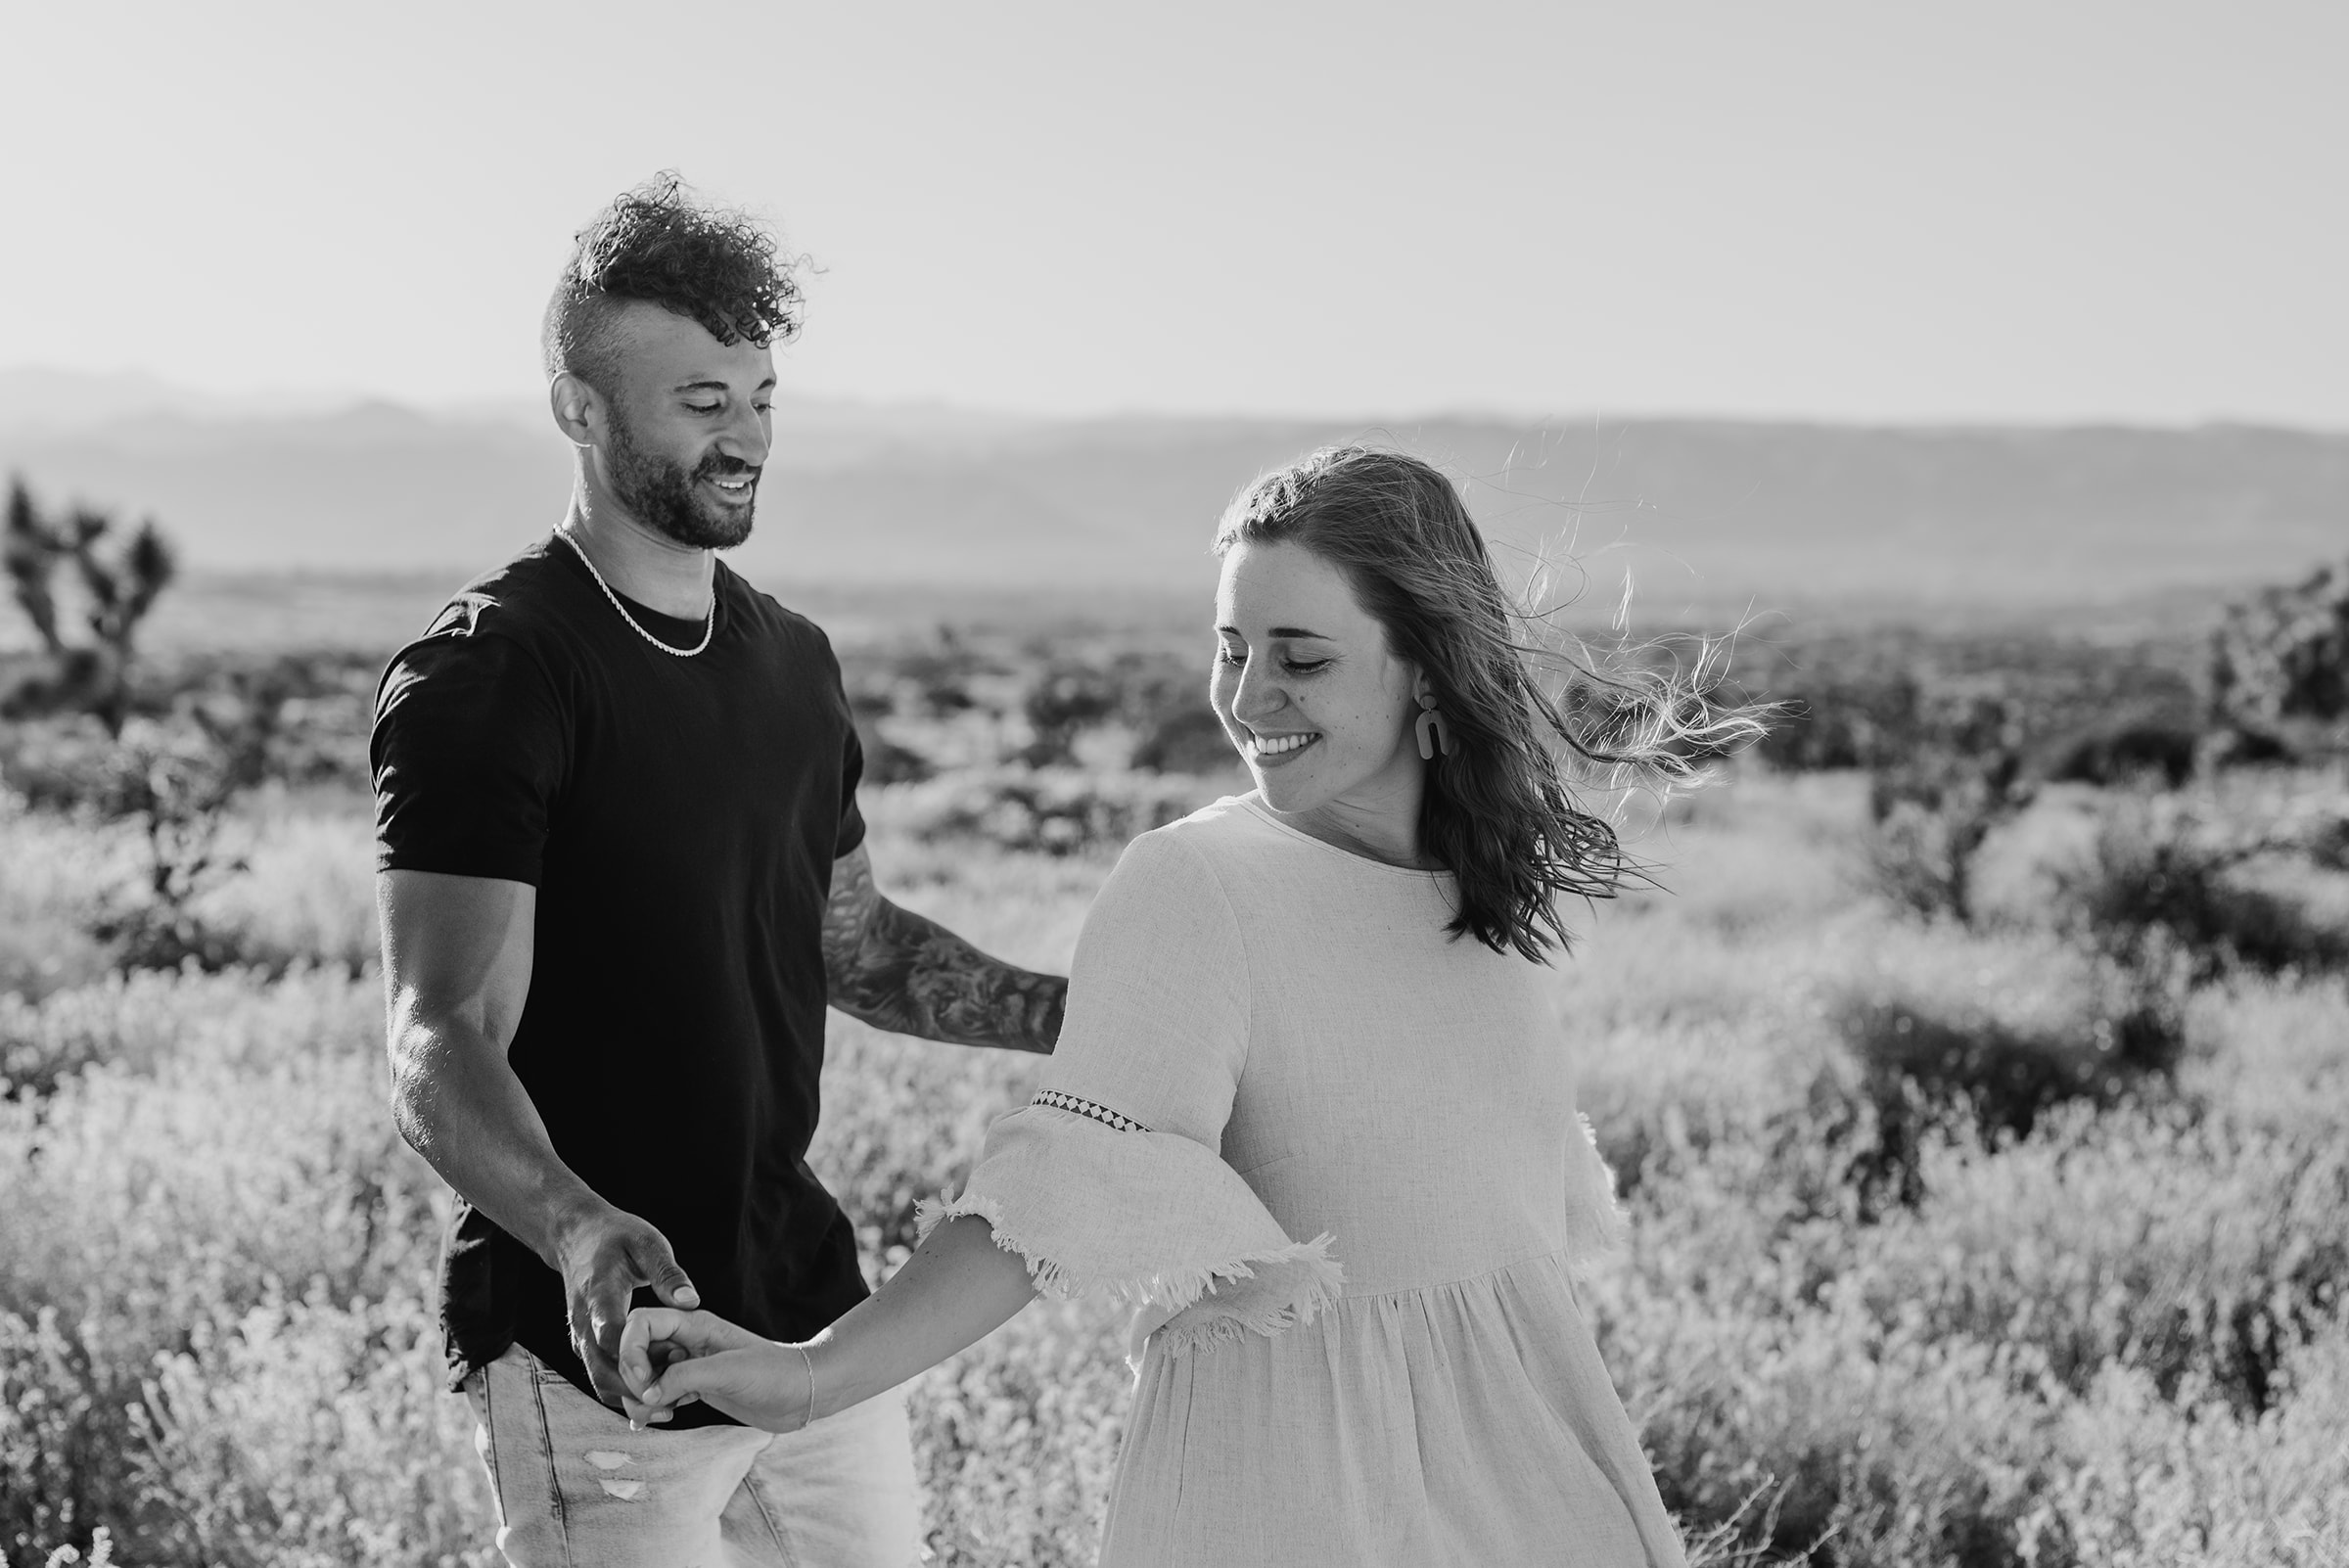 Black and white image of man and woman dancing in the desert